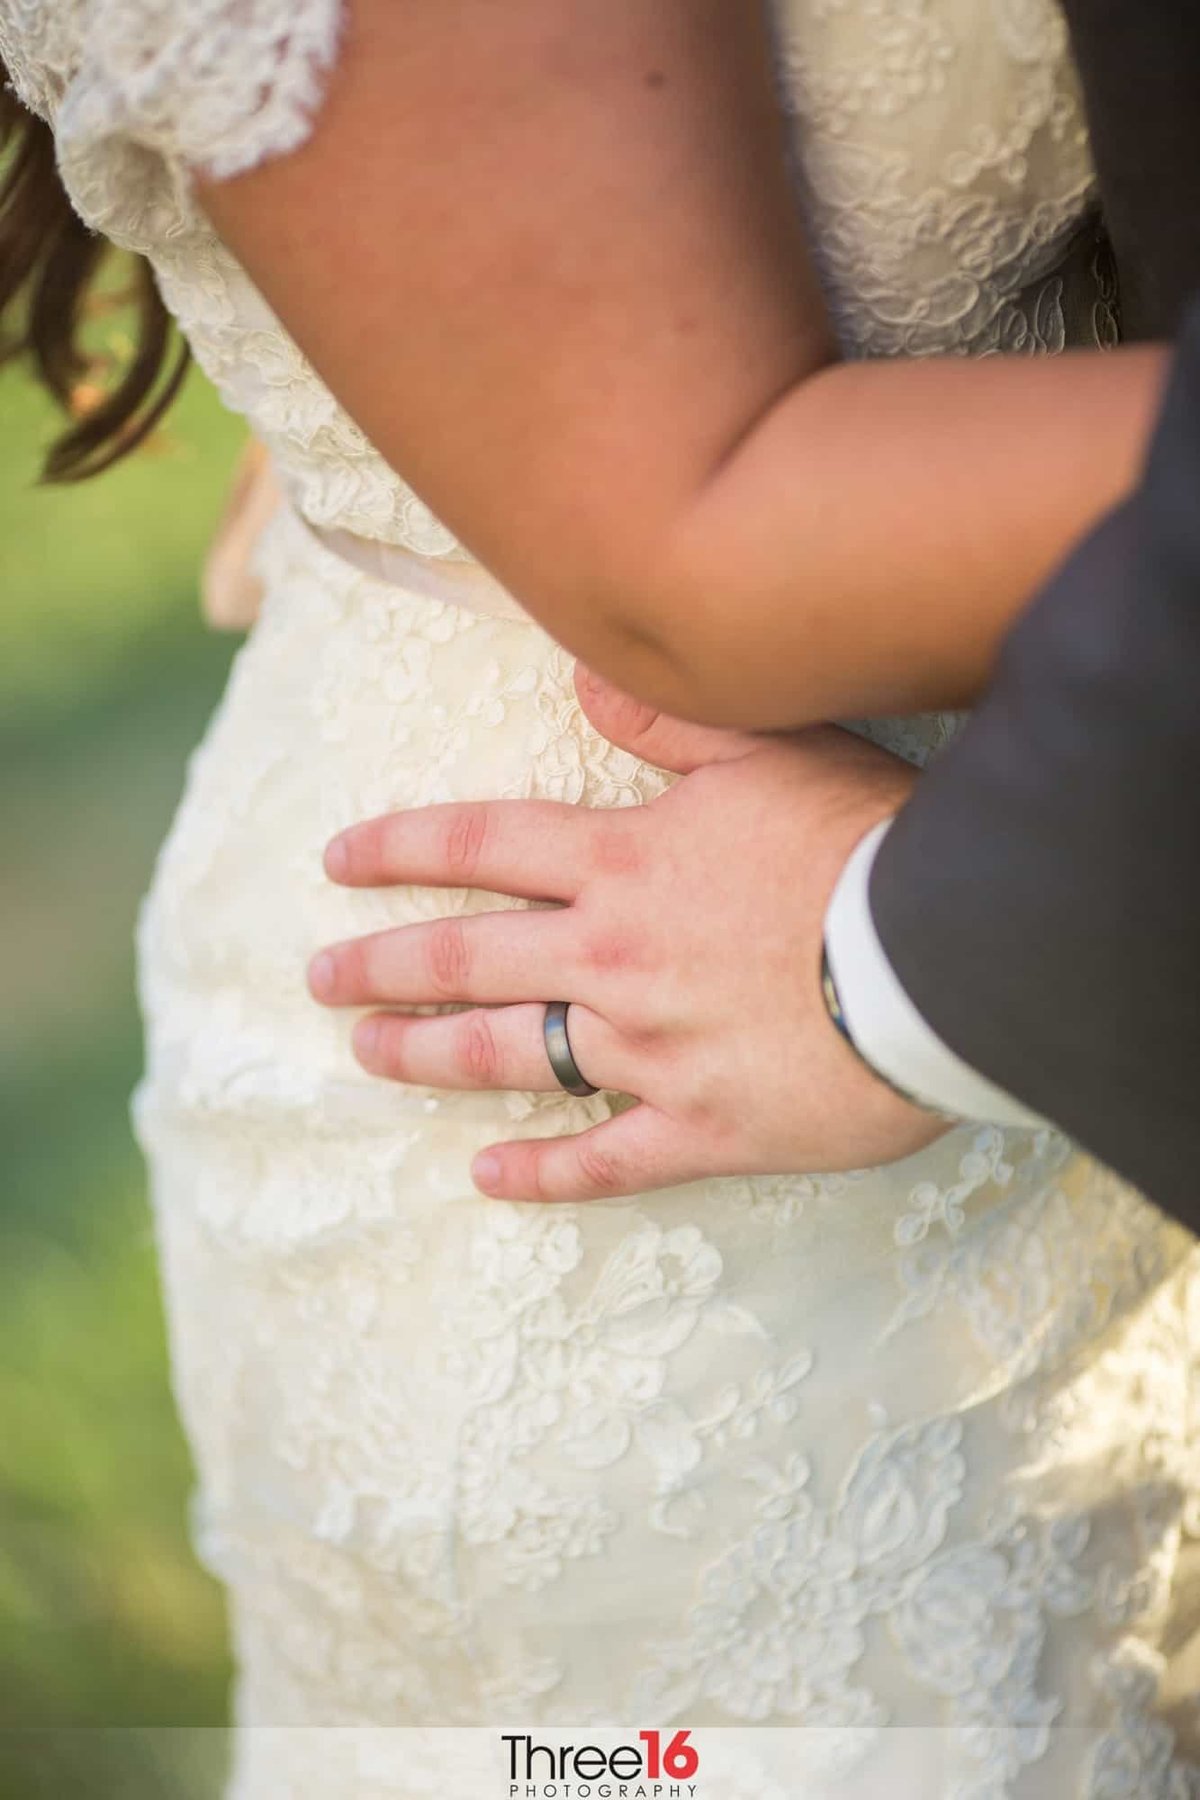 Groom's ring shines as they embrace each other